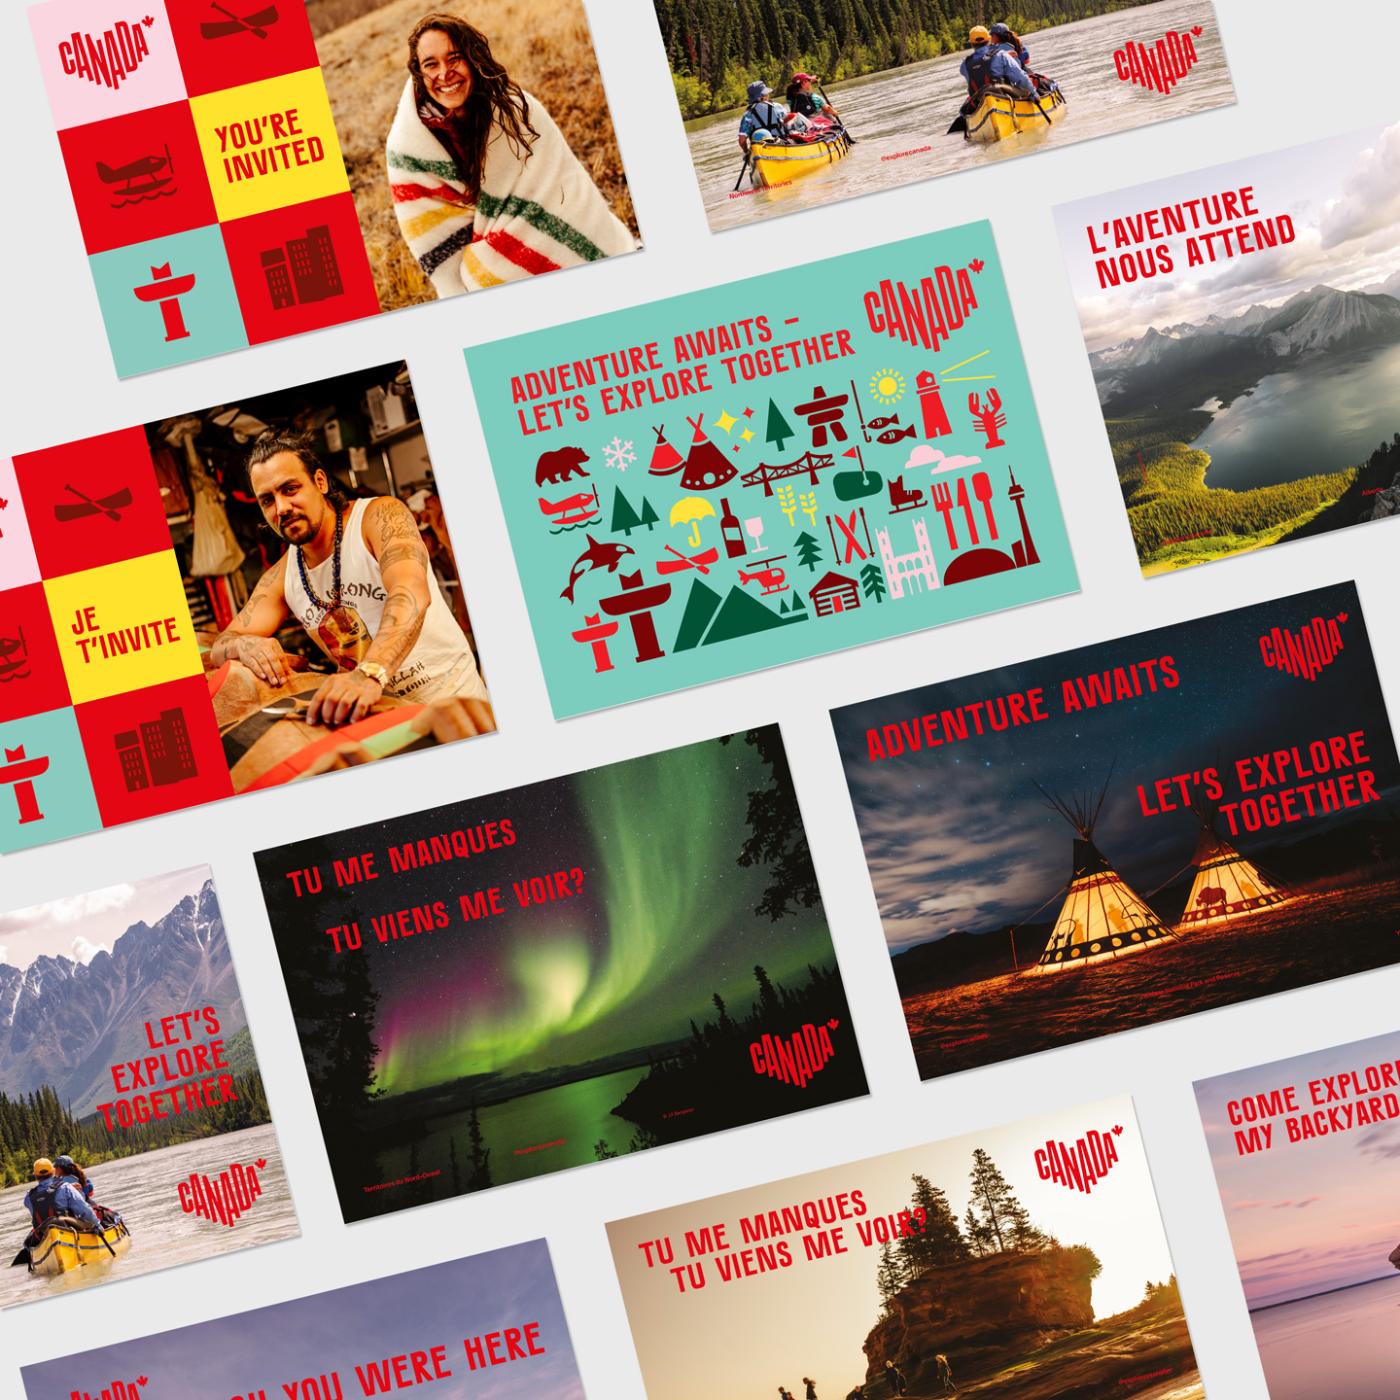 Various postcards in English and French using the Canada branding